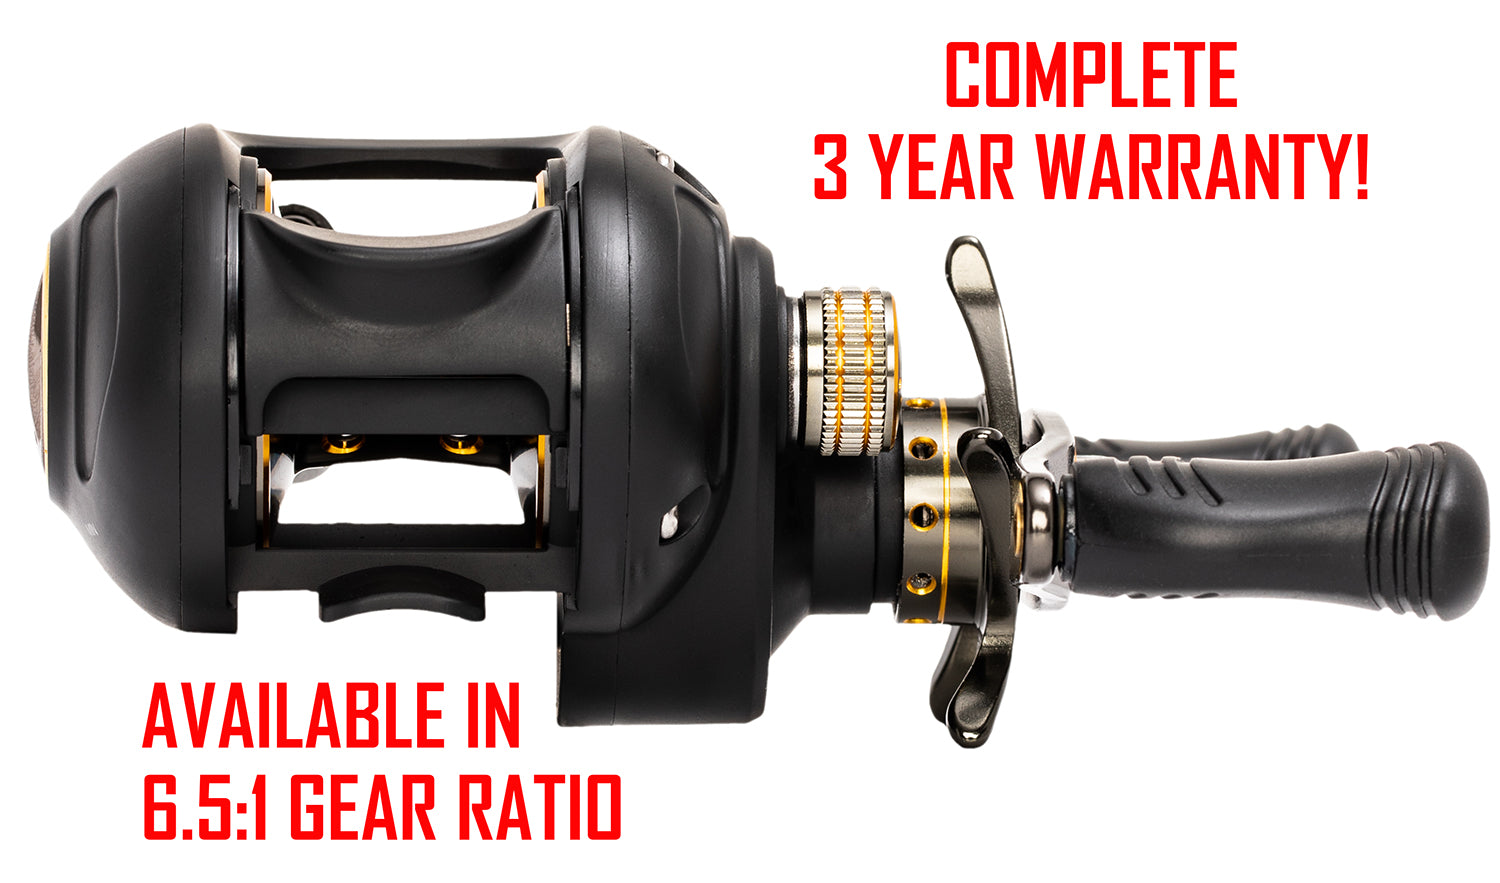 Black APEX TOURNAMENT Baitcaster with red text. text:  COMPLETE 3 YEAR WARRANTY! AVAILABLE IN 6.5:1 GEAR RATIO